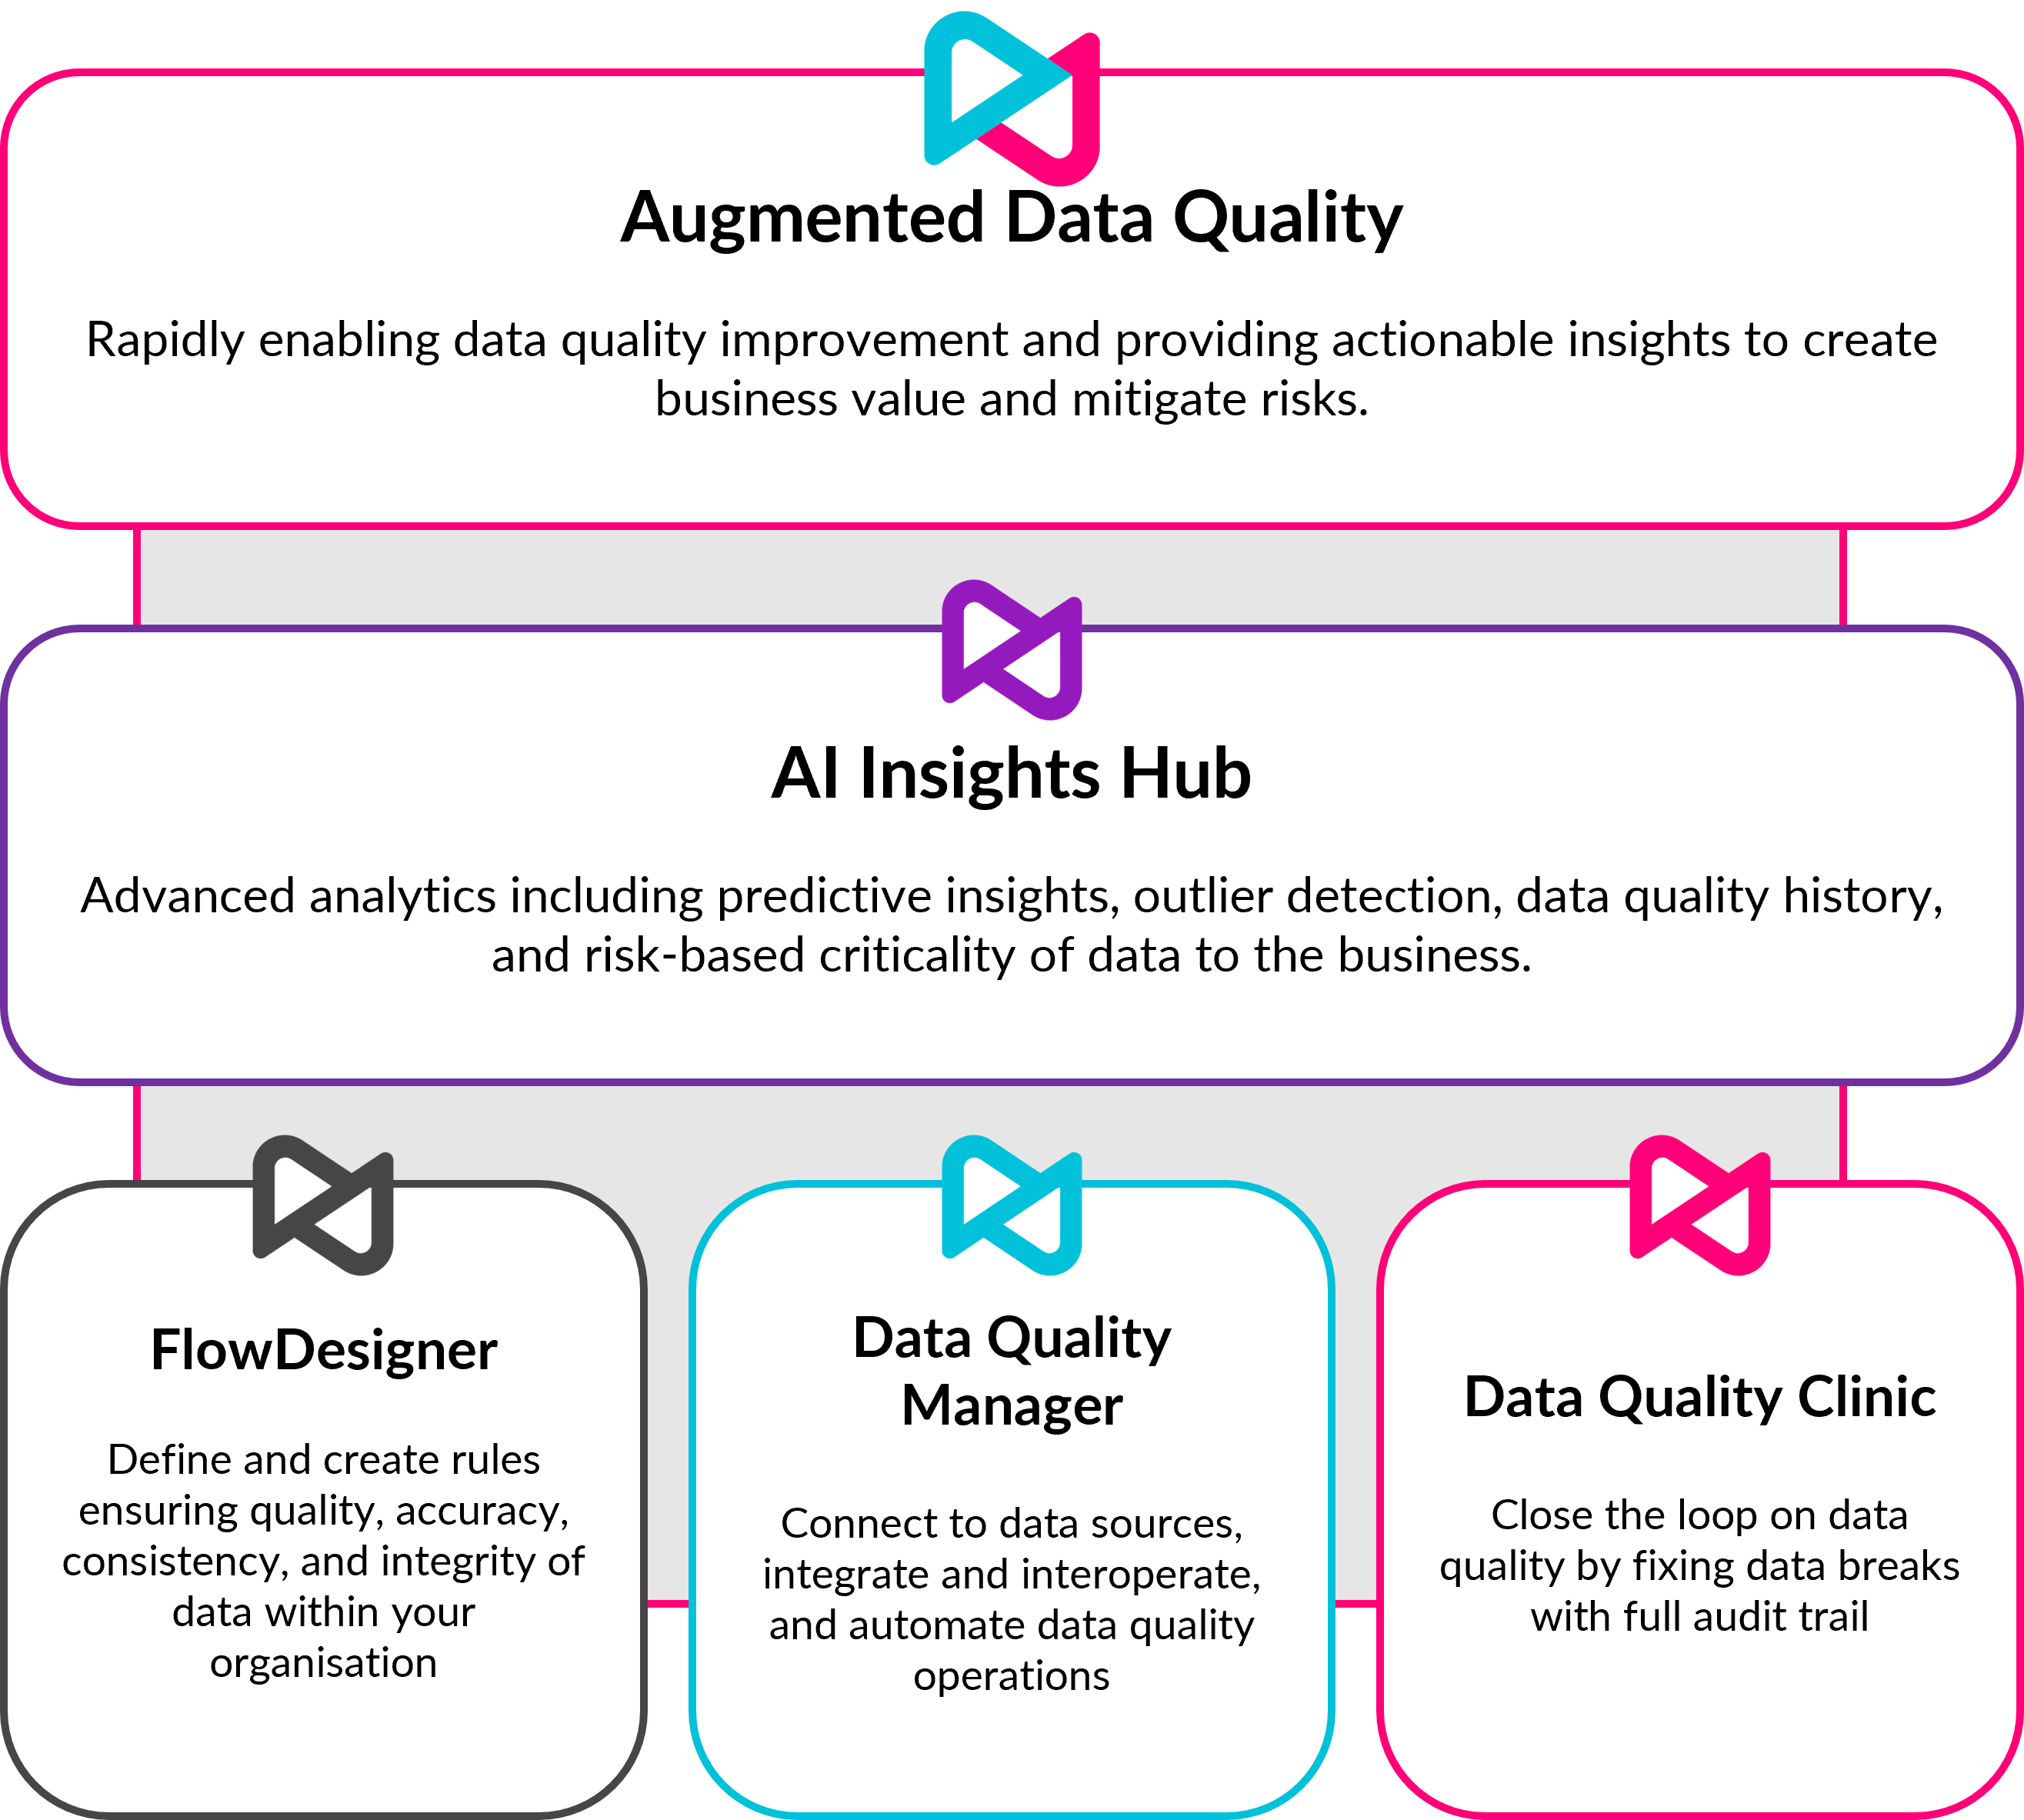 Augmented Data Quality delivers automation of core data quality processes, augmented by machine learning, underpinned by the core Datactics data quality platform